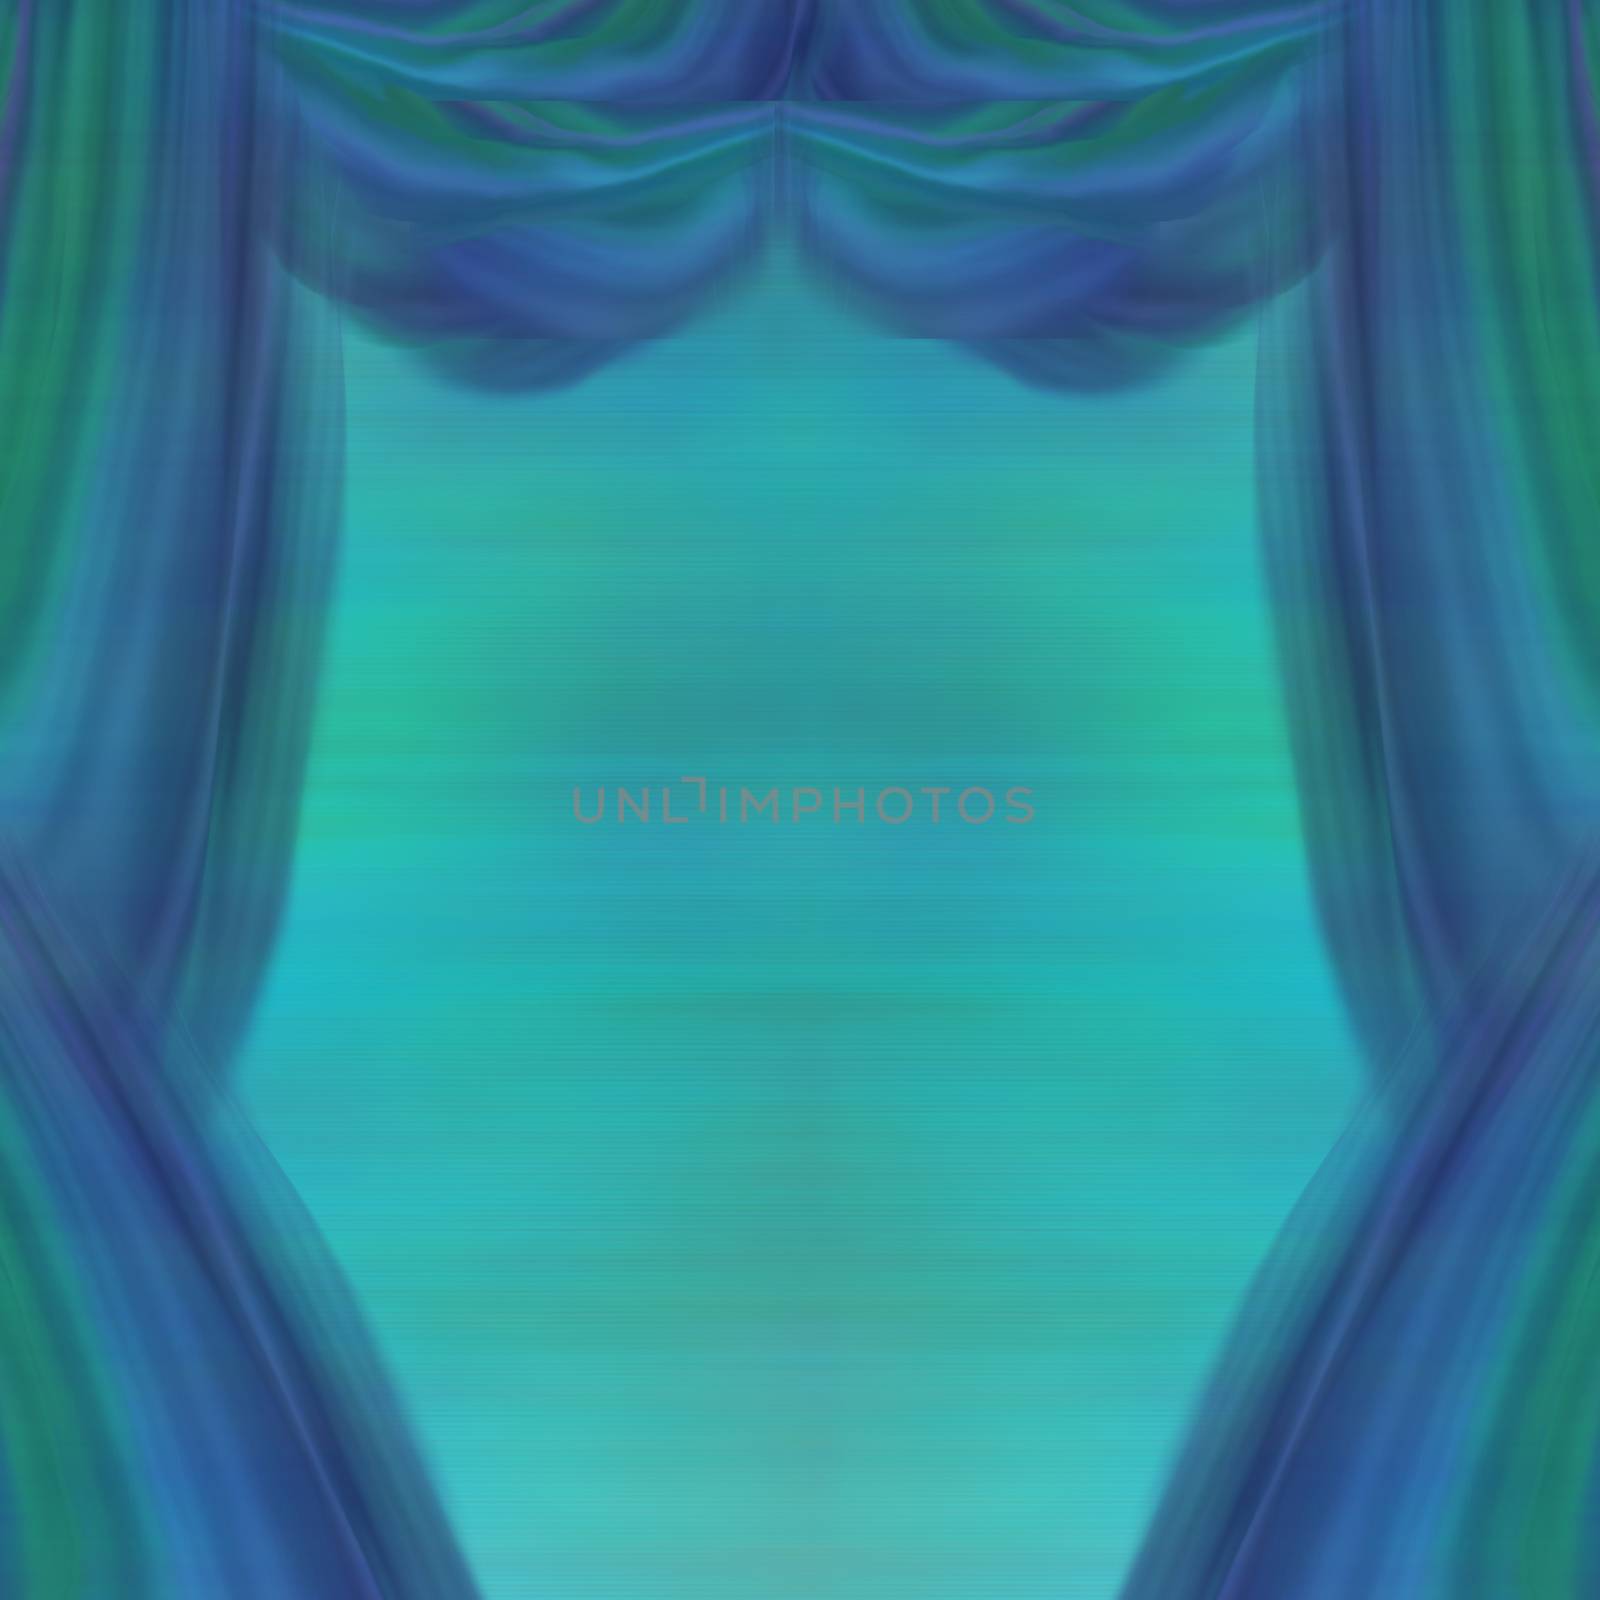 Theater Curtains, abstract blue and green background